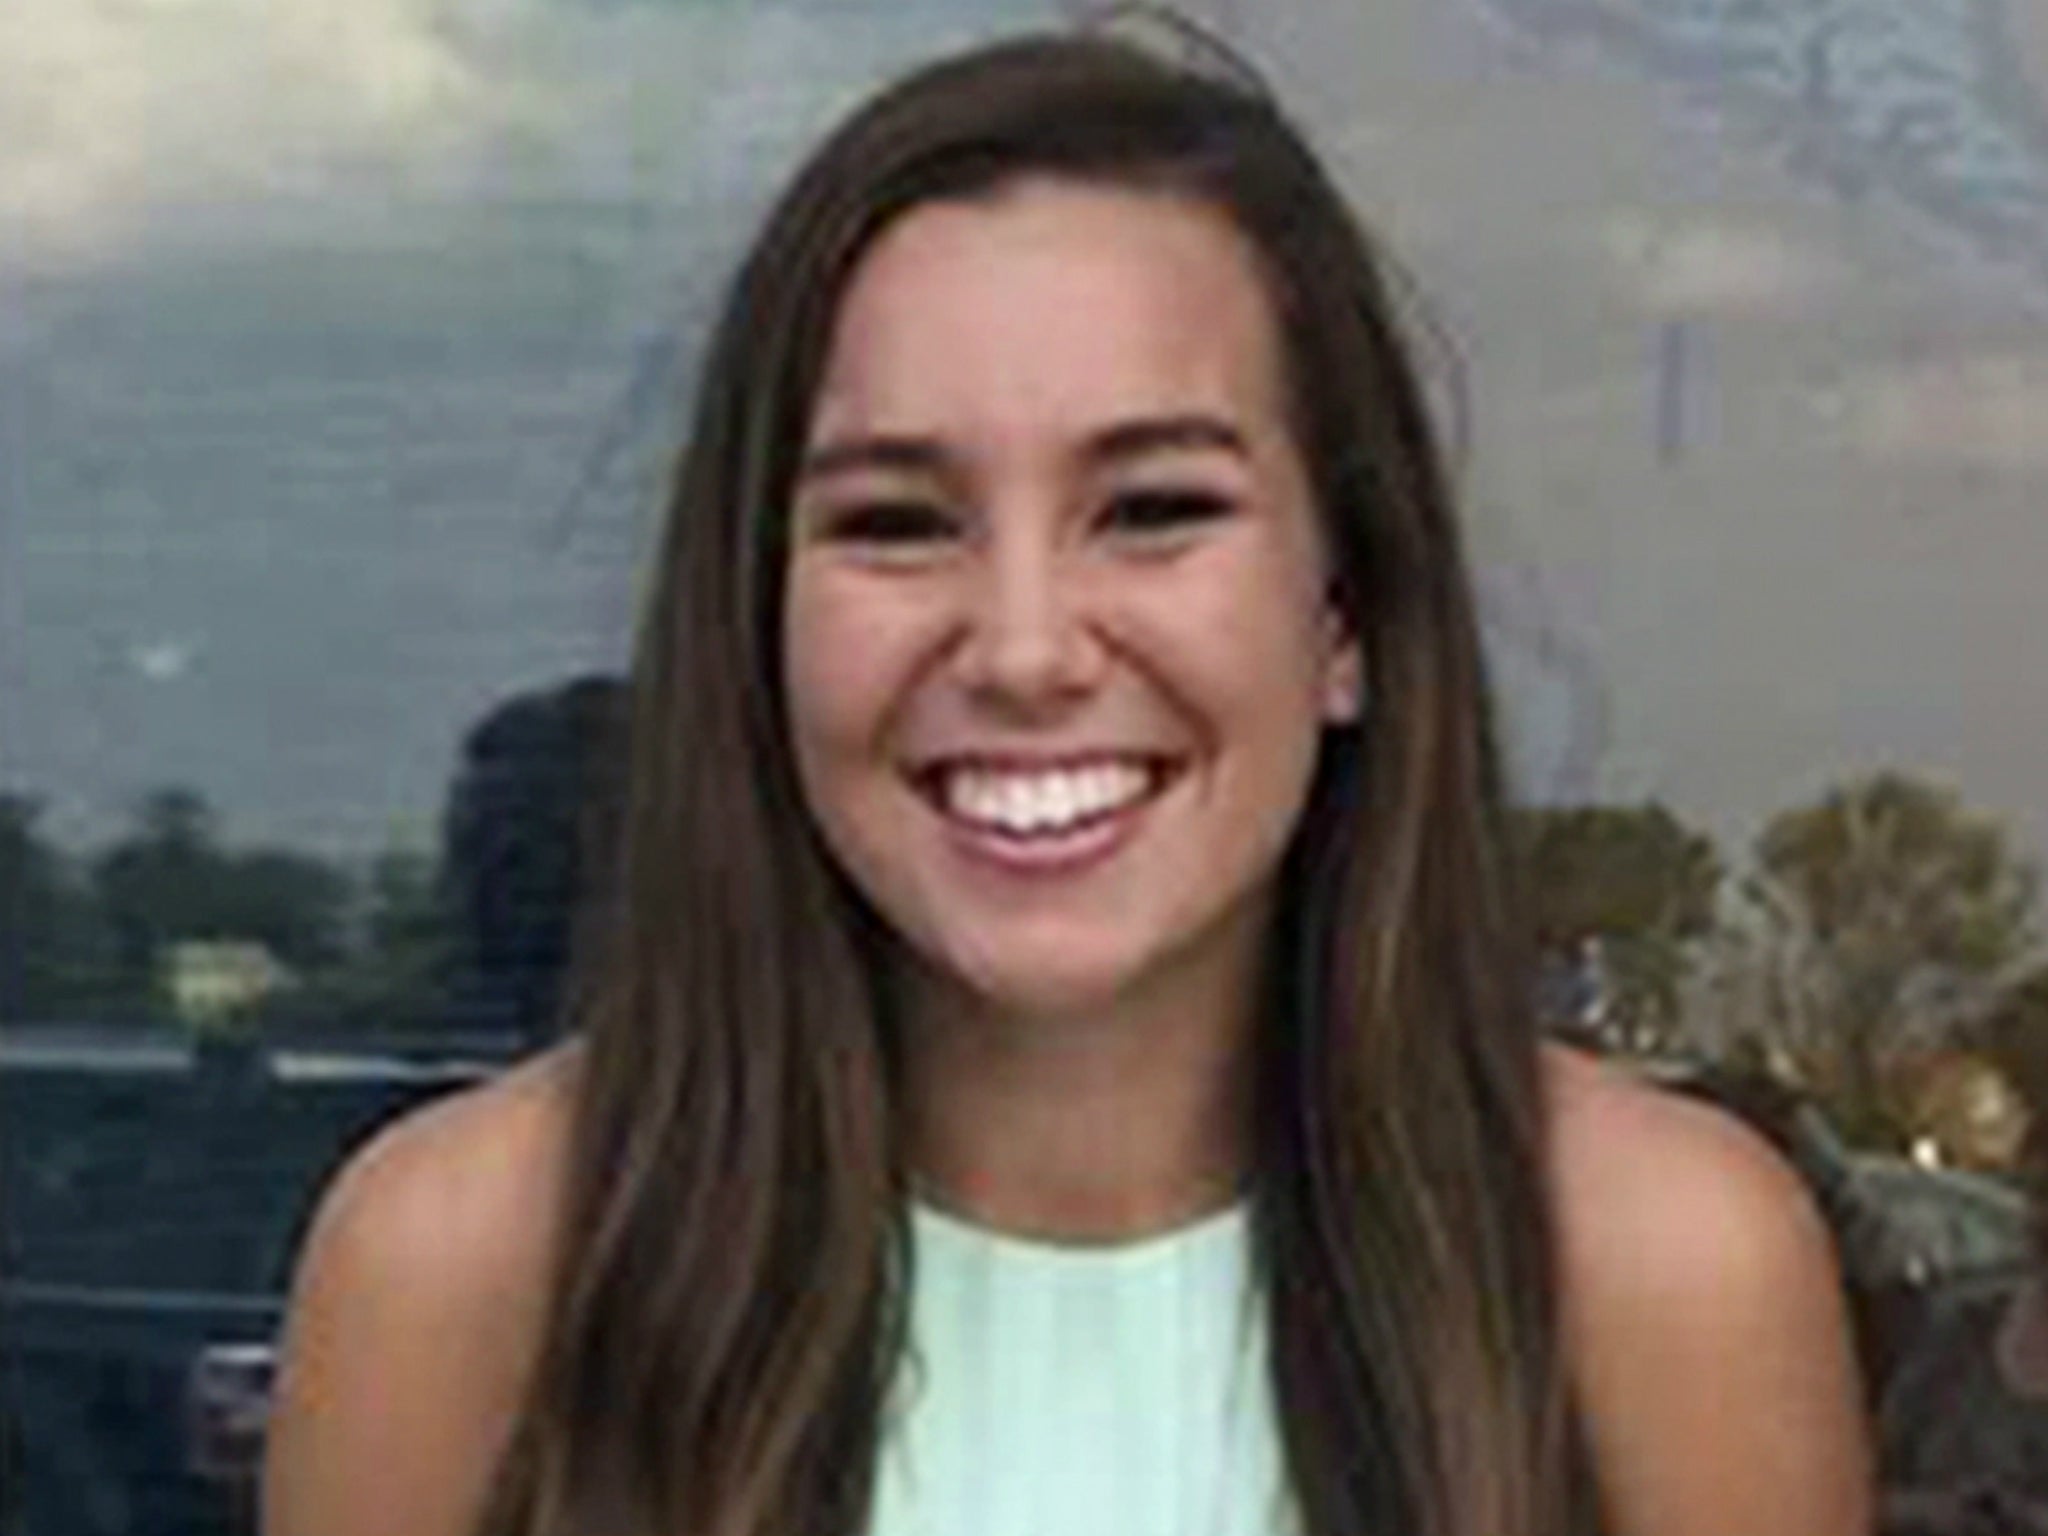 Mollie Tibbetts has been missing for weeks